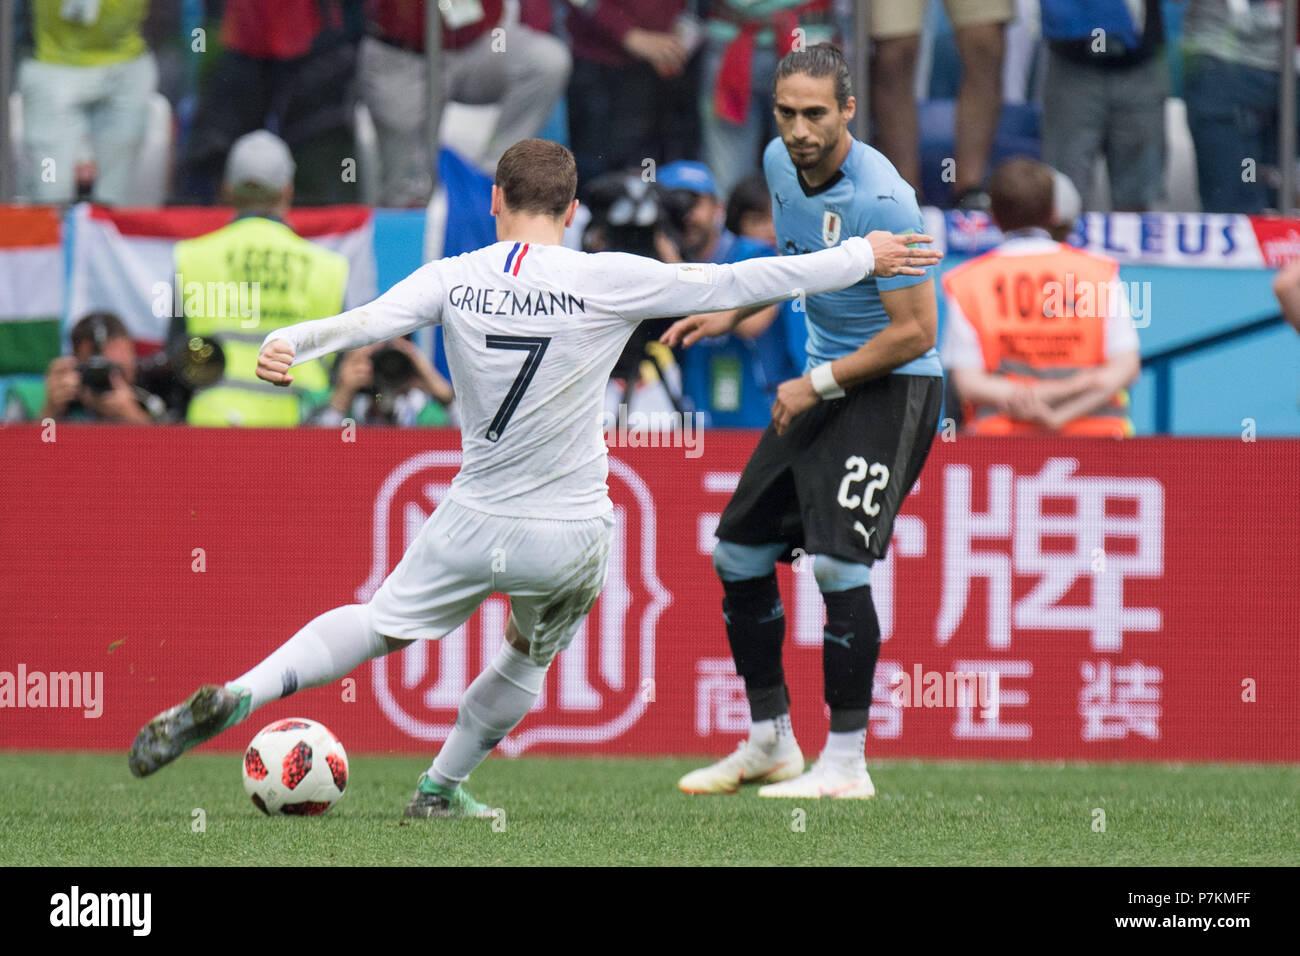 Nizhny Novgorod, Russia. 6th July 2018. Antoine GRIEZMANN (left, FRA) shoots against Martin CACERES (URU) the goal to 2: 0 for France, action, Uruguay (URU) - France (FRA) 0: 2, quarter-finals, game 57, on 06.07.2018 in Nizhny Novgorod; Football World Cup 2018 in Russia from 14.06. - 15.07.2018. | usage worldwide Credit: dpa picture alliance/Alamy Live News Stock Photo